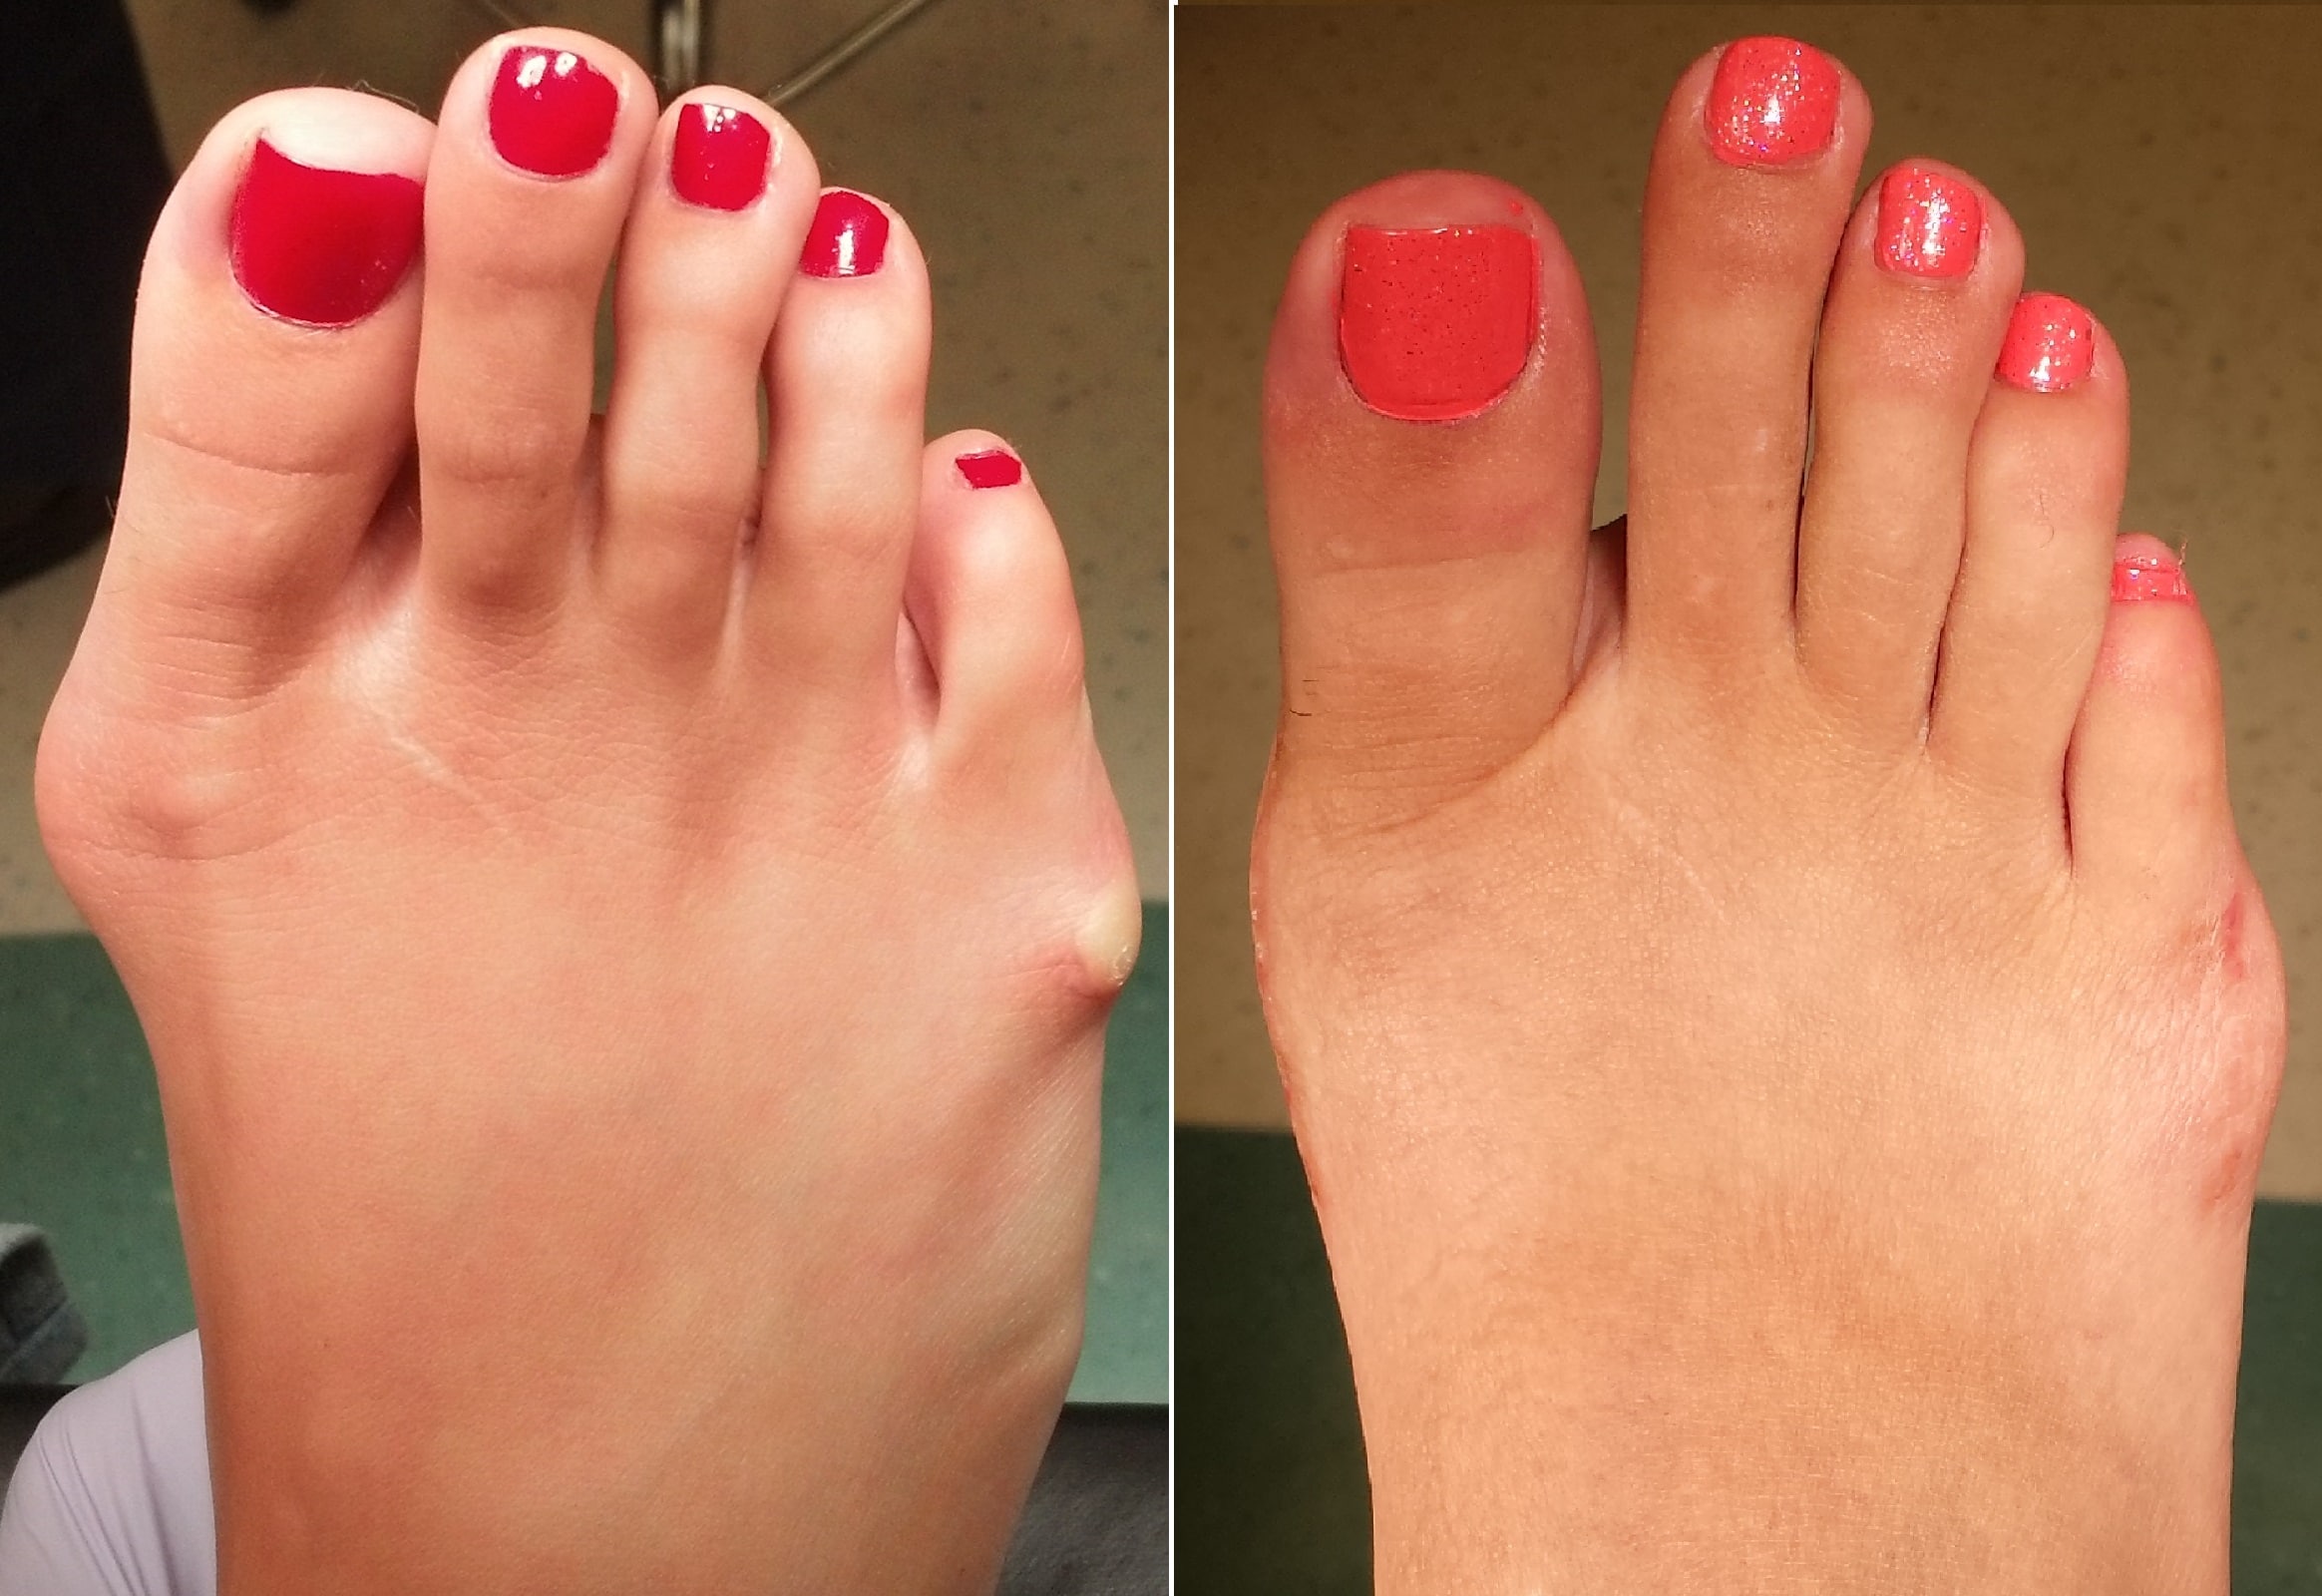 Bunion Pictures Before and After Surgery. 